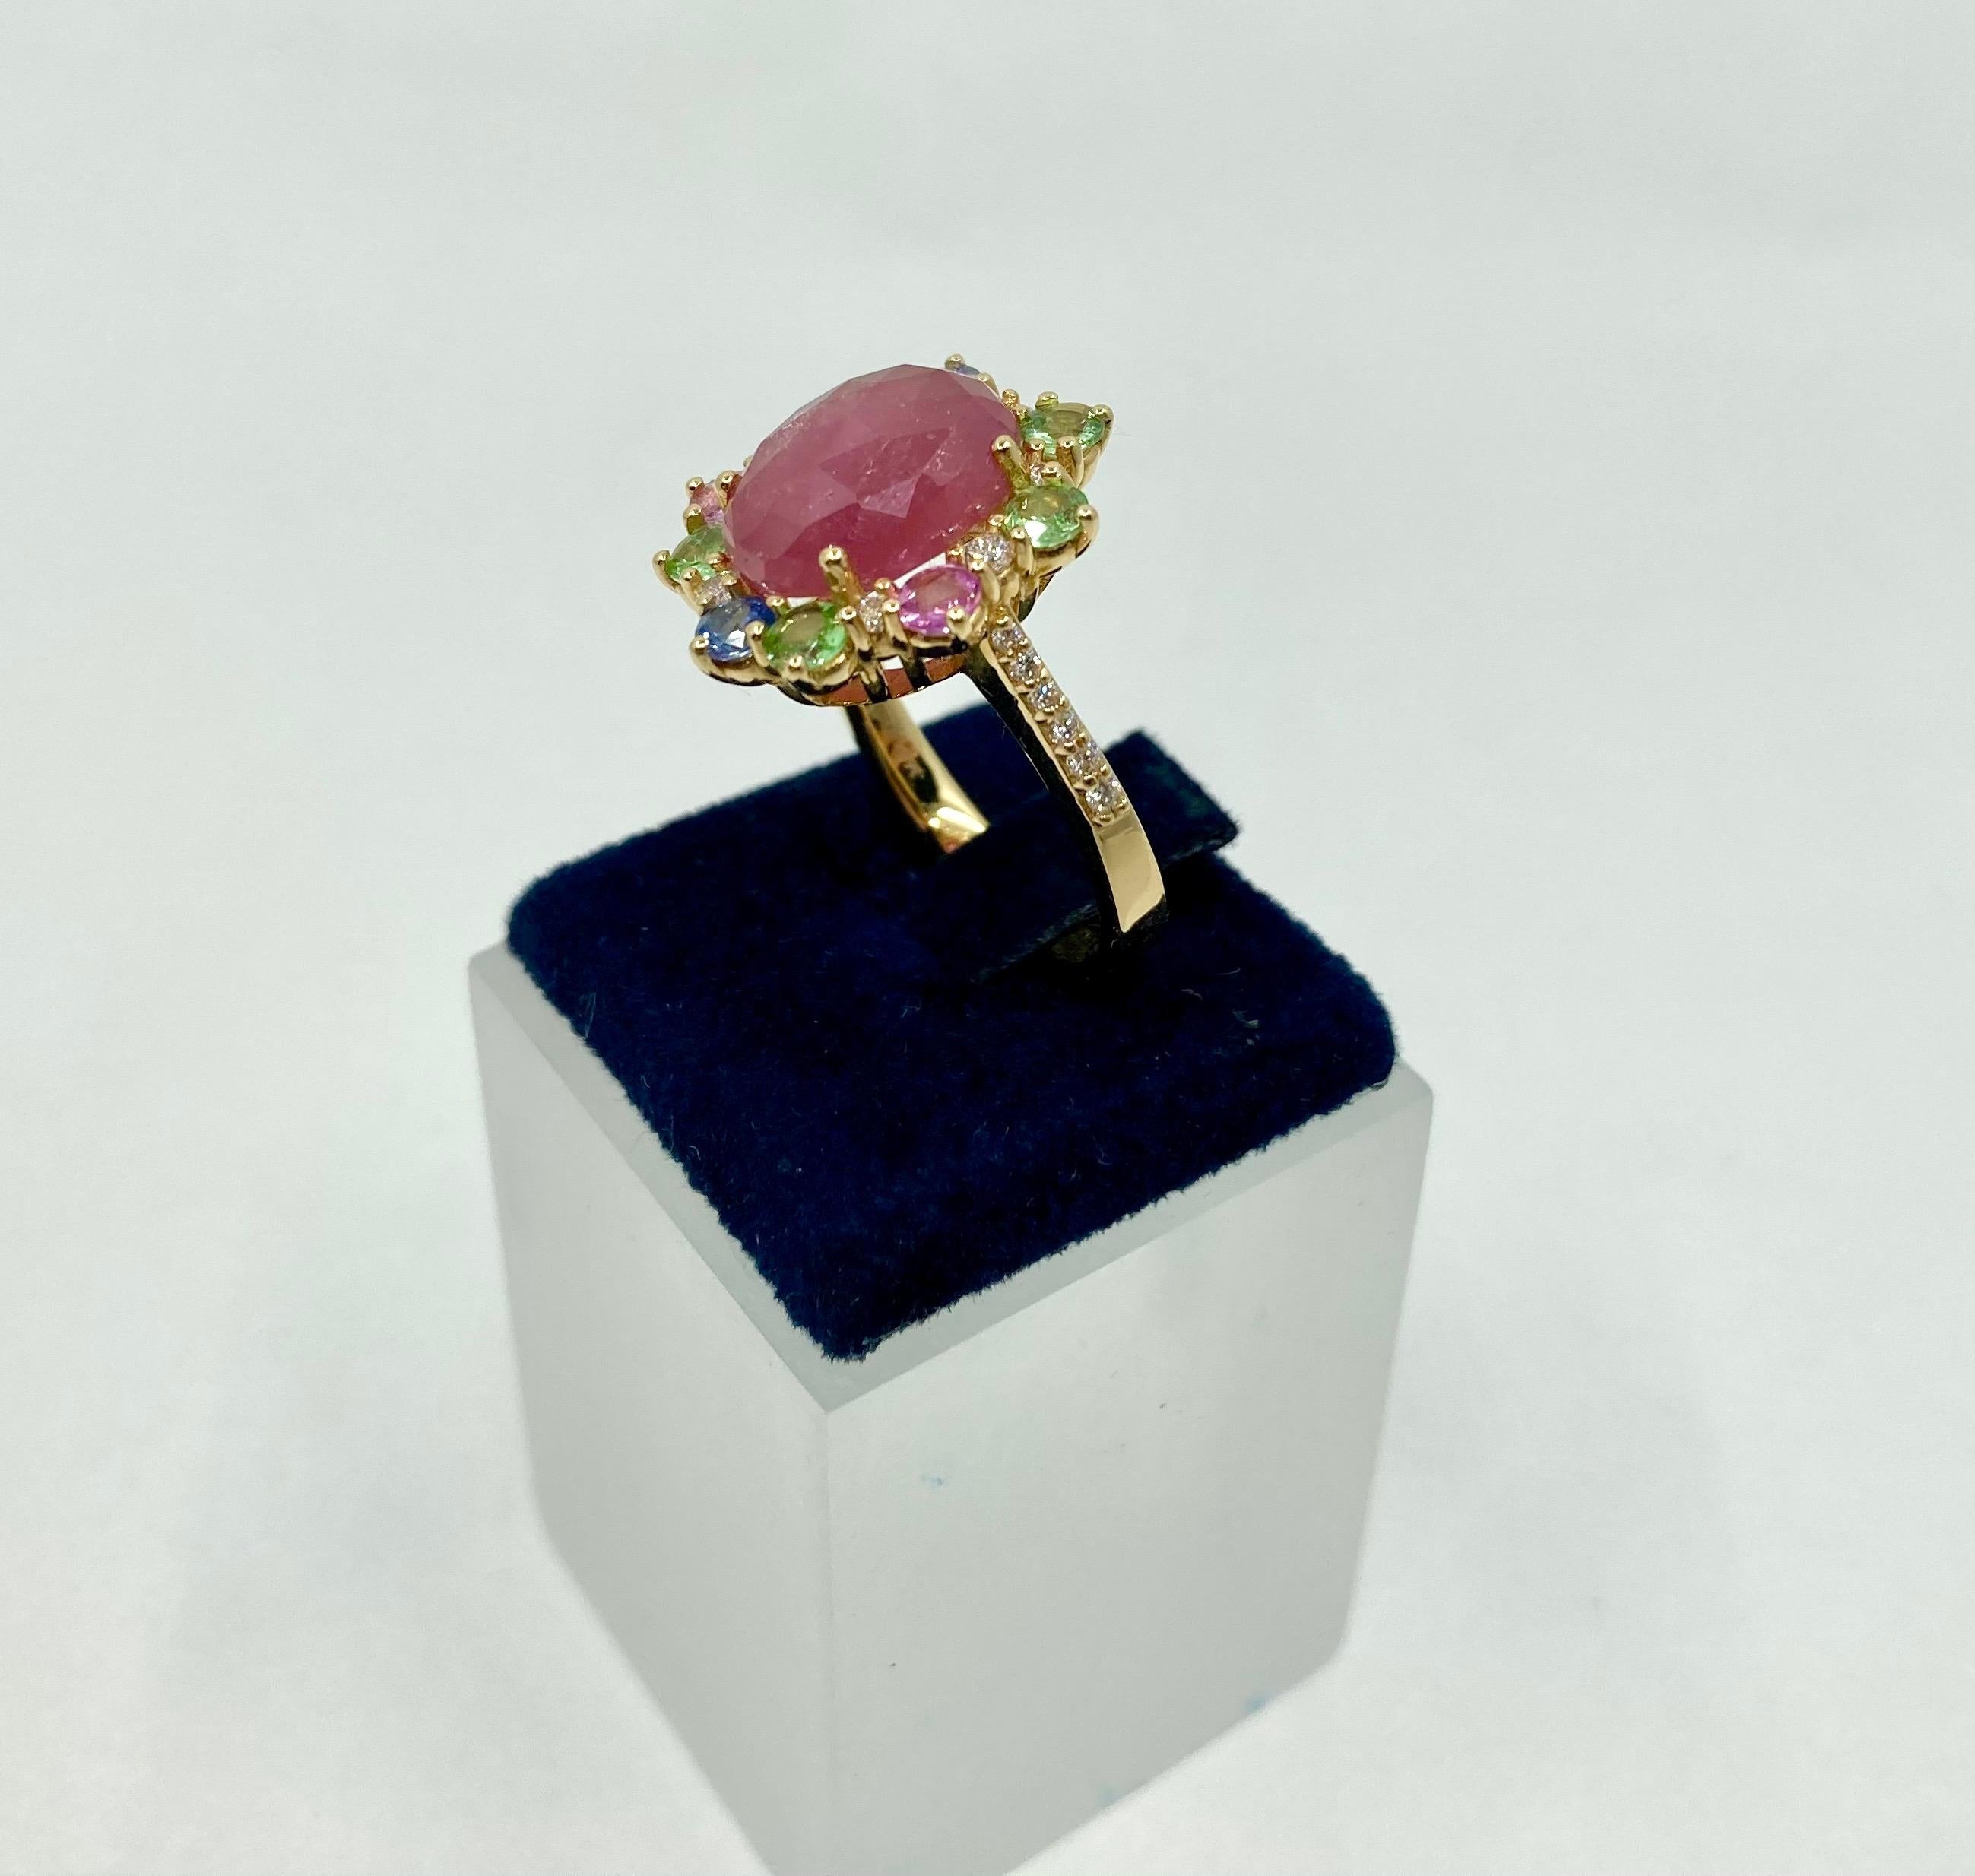 Timeless elengat Yellow Gold ring, with a Pink Slice Sapphire (12x12mm size) ct. 4.85, Blue and Pink Sapphires ct. 0.53, Tsavorite ct. 0.09 and Diamonds ct. 0.25, Made in Italy by Roberto Casarin. 

Size: 13,5 (6 1/4 USA)

Colorful and